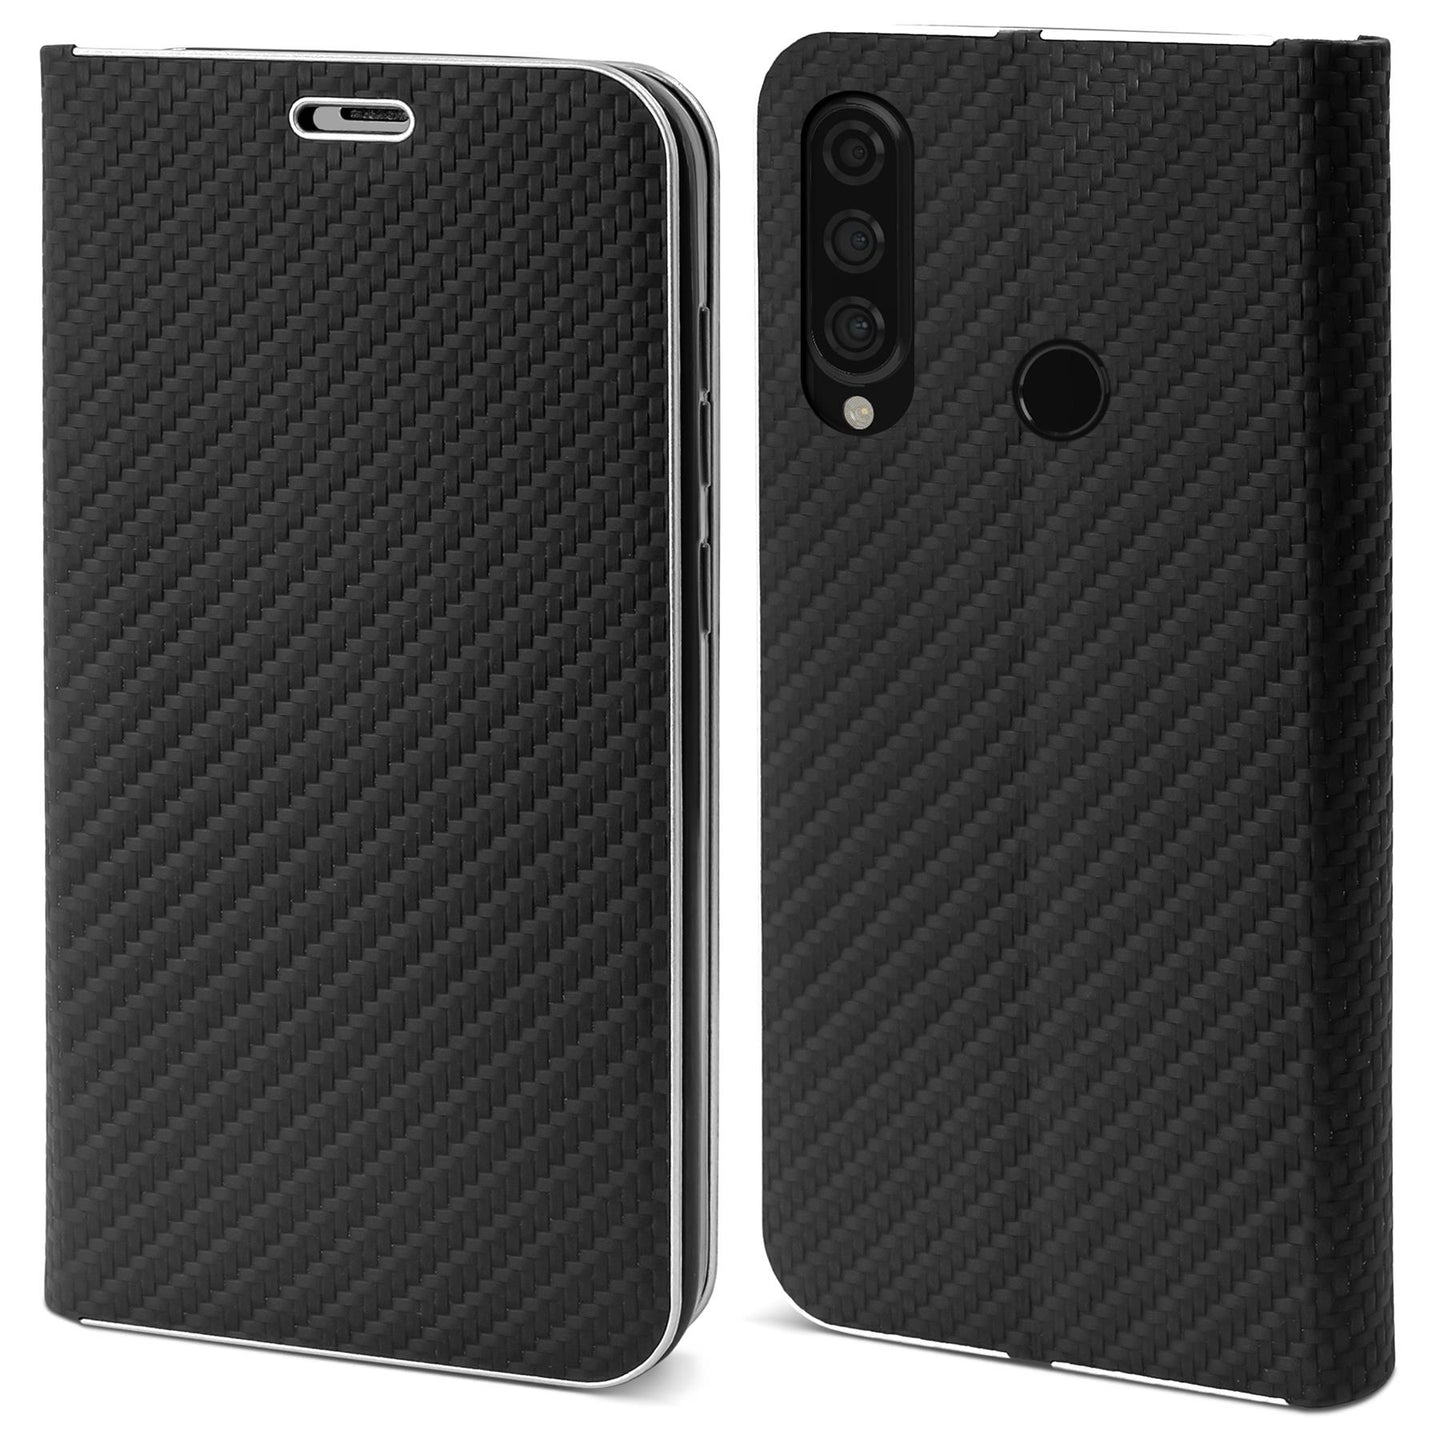 Moozy Wallet Case for Huawei P30 Lite, Black Carbon – Metallic Edge Protection Magnetic Closure Flip Cover with Card Holder